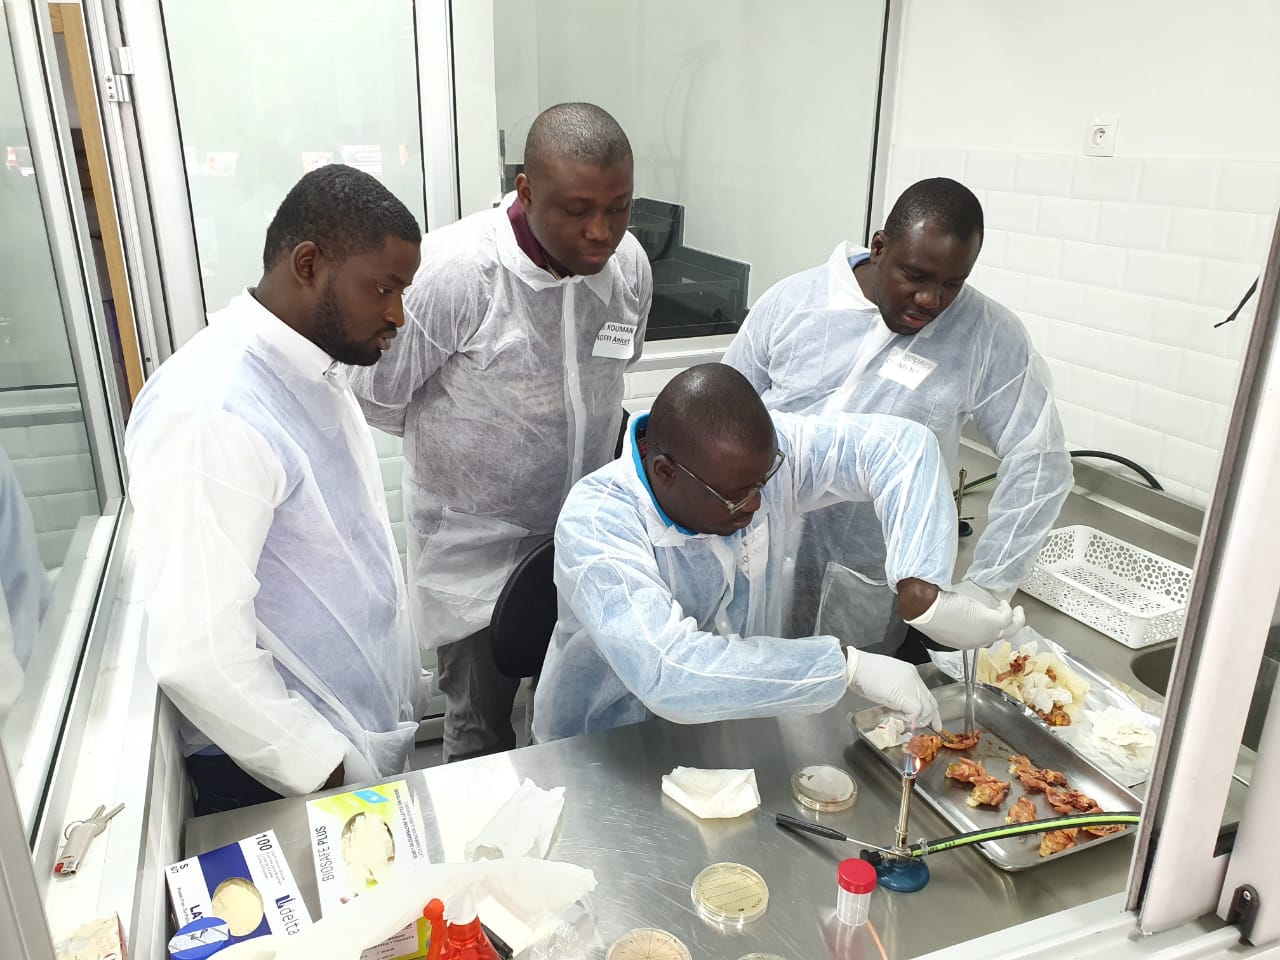 Four men wearing white hazmat suits inspect cooked chicken on a stainless steel counter